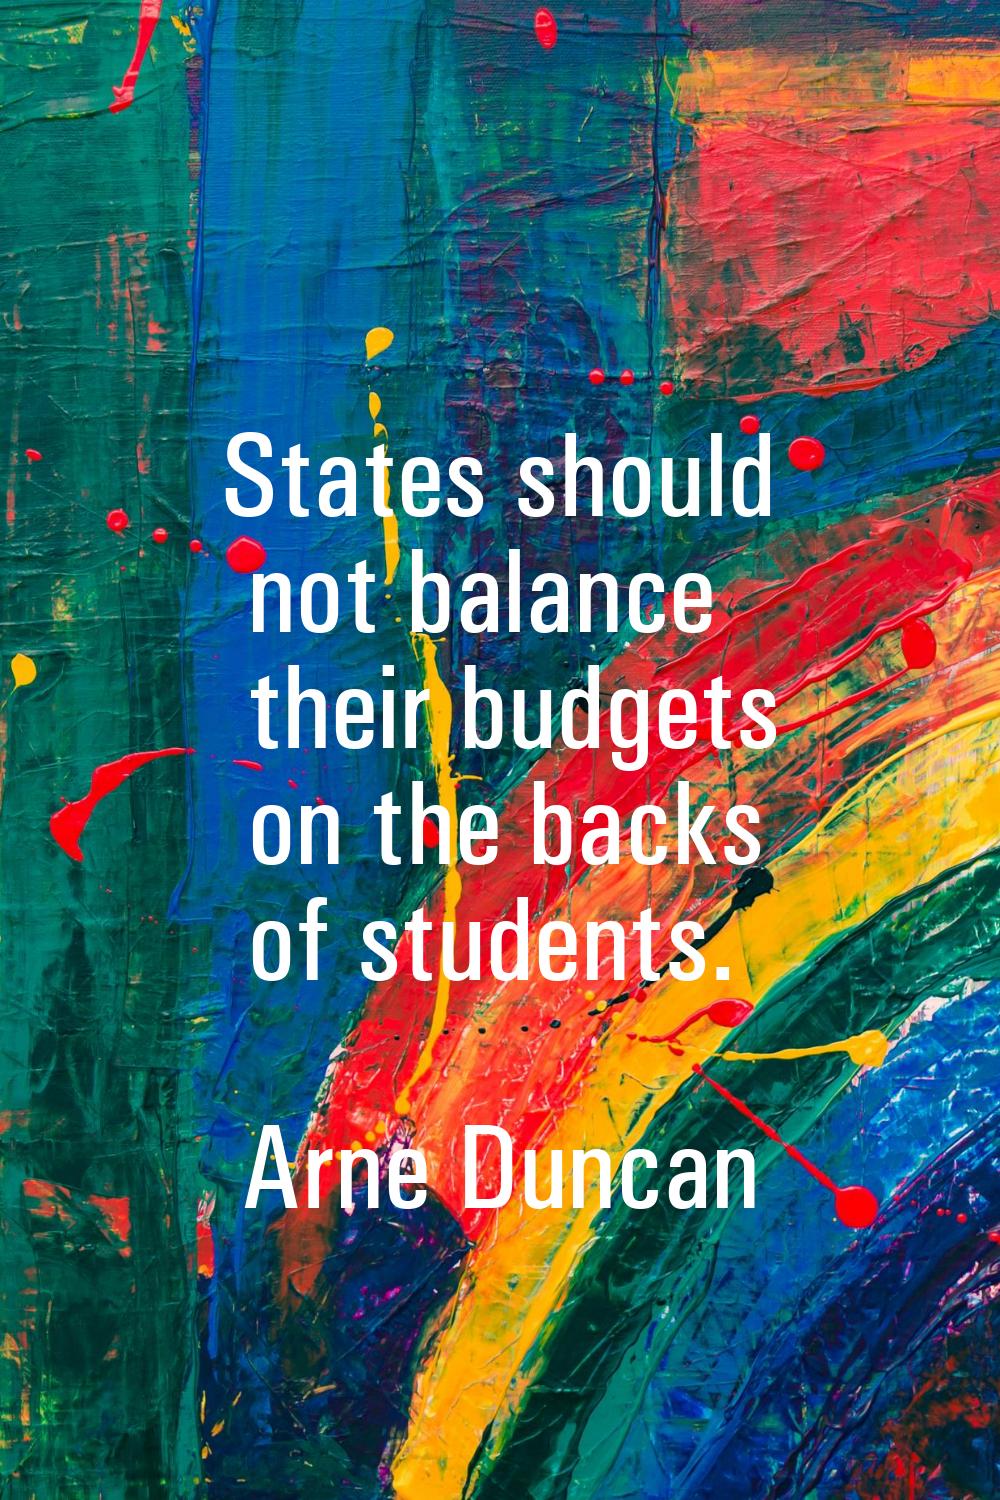 States should not balance their budgets on the backs of students.